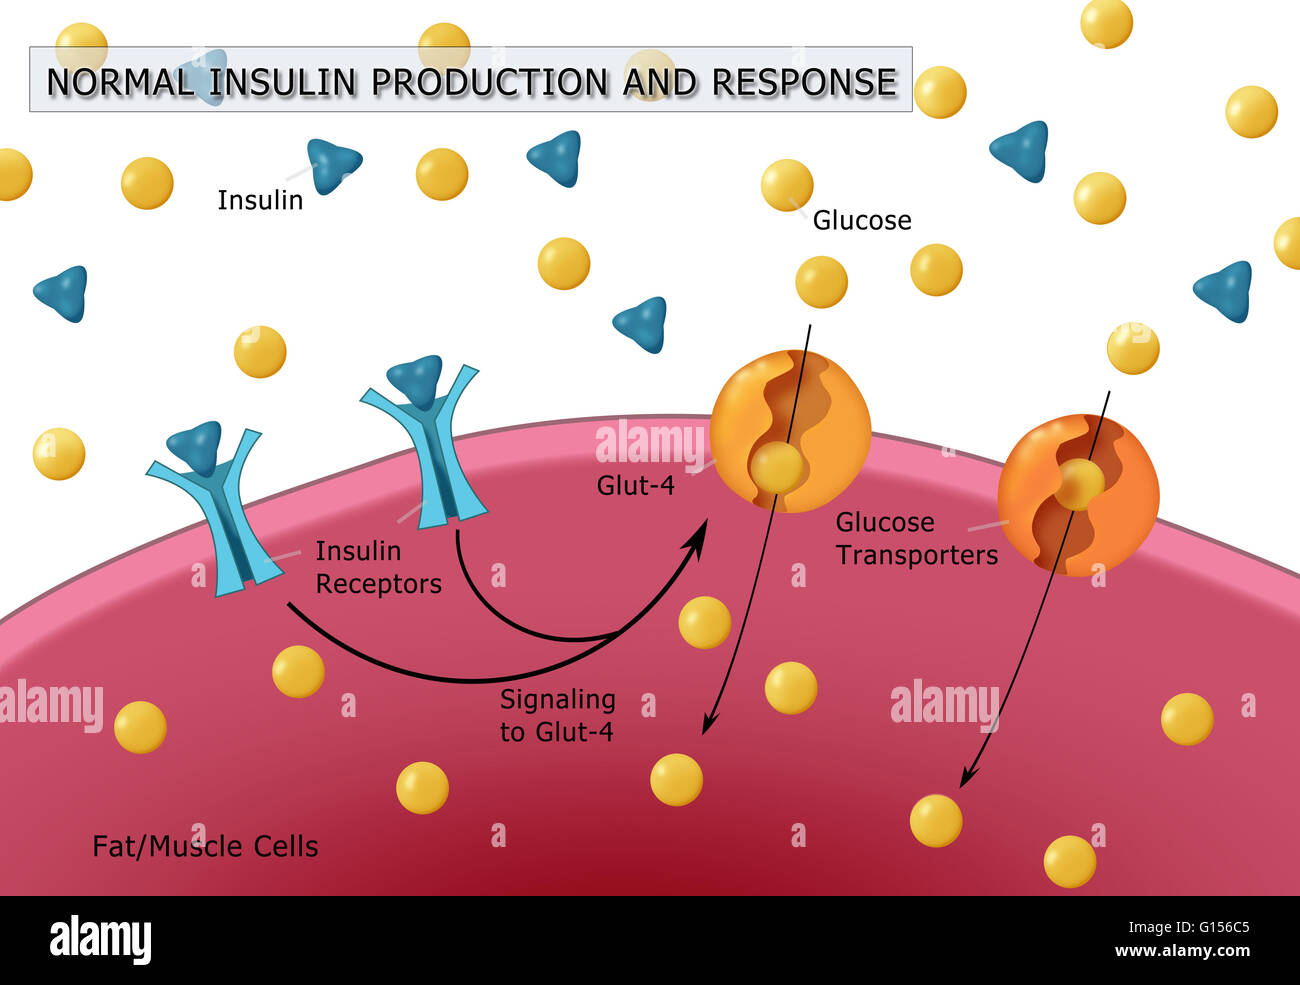 Illustration of normal insulin and glucose production. Insulin (blue  triangles) is produced by islet cells in the pancreas, and acts in unison  with glucose (yellow dots) to regulate energy in the body's